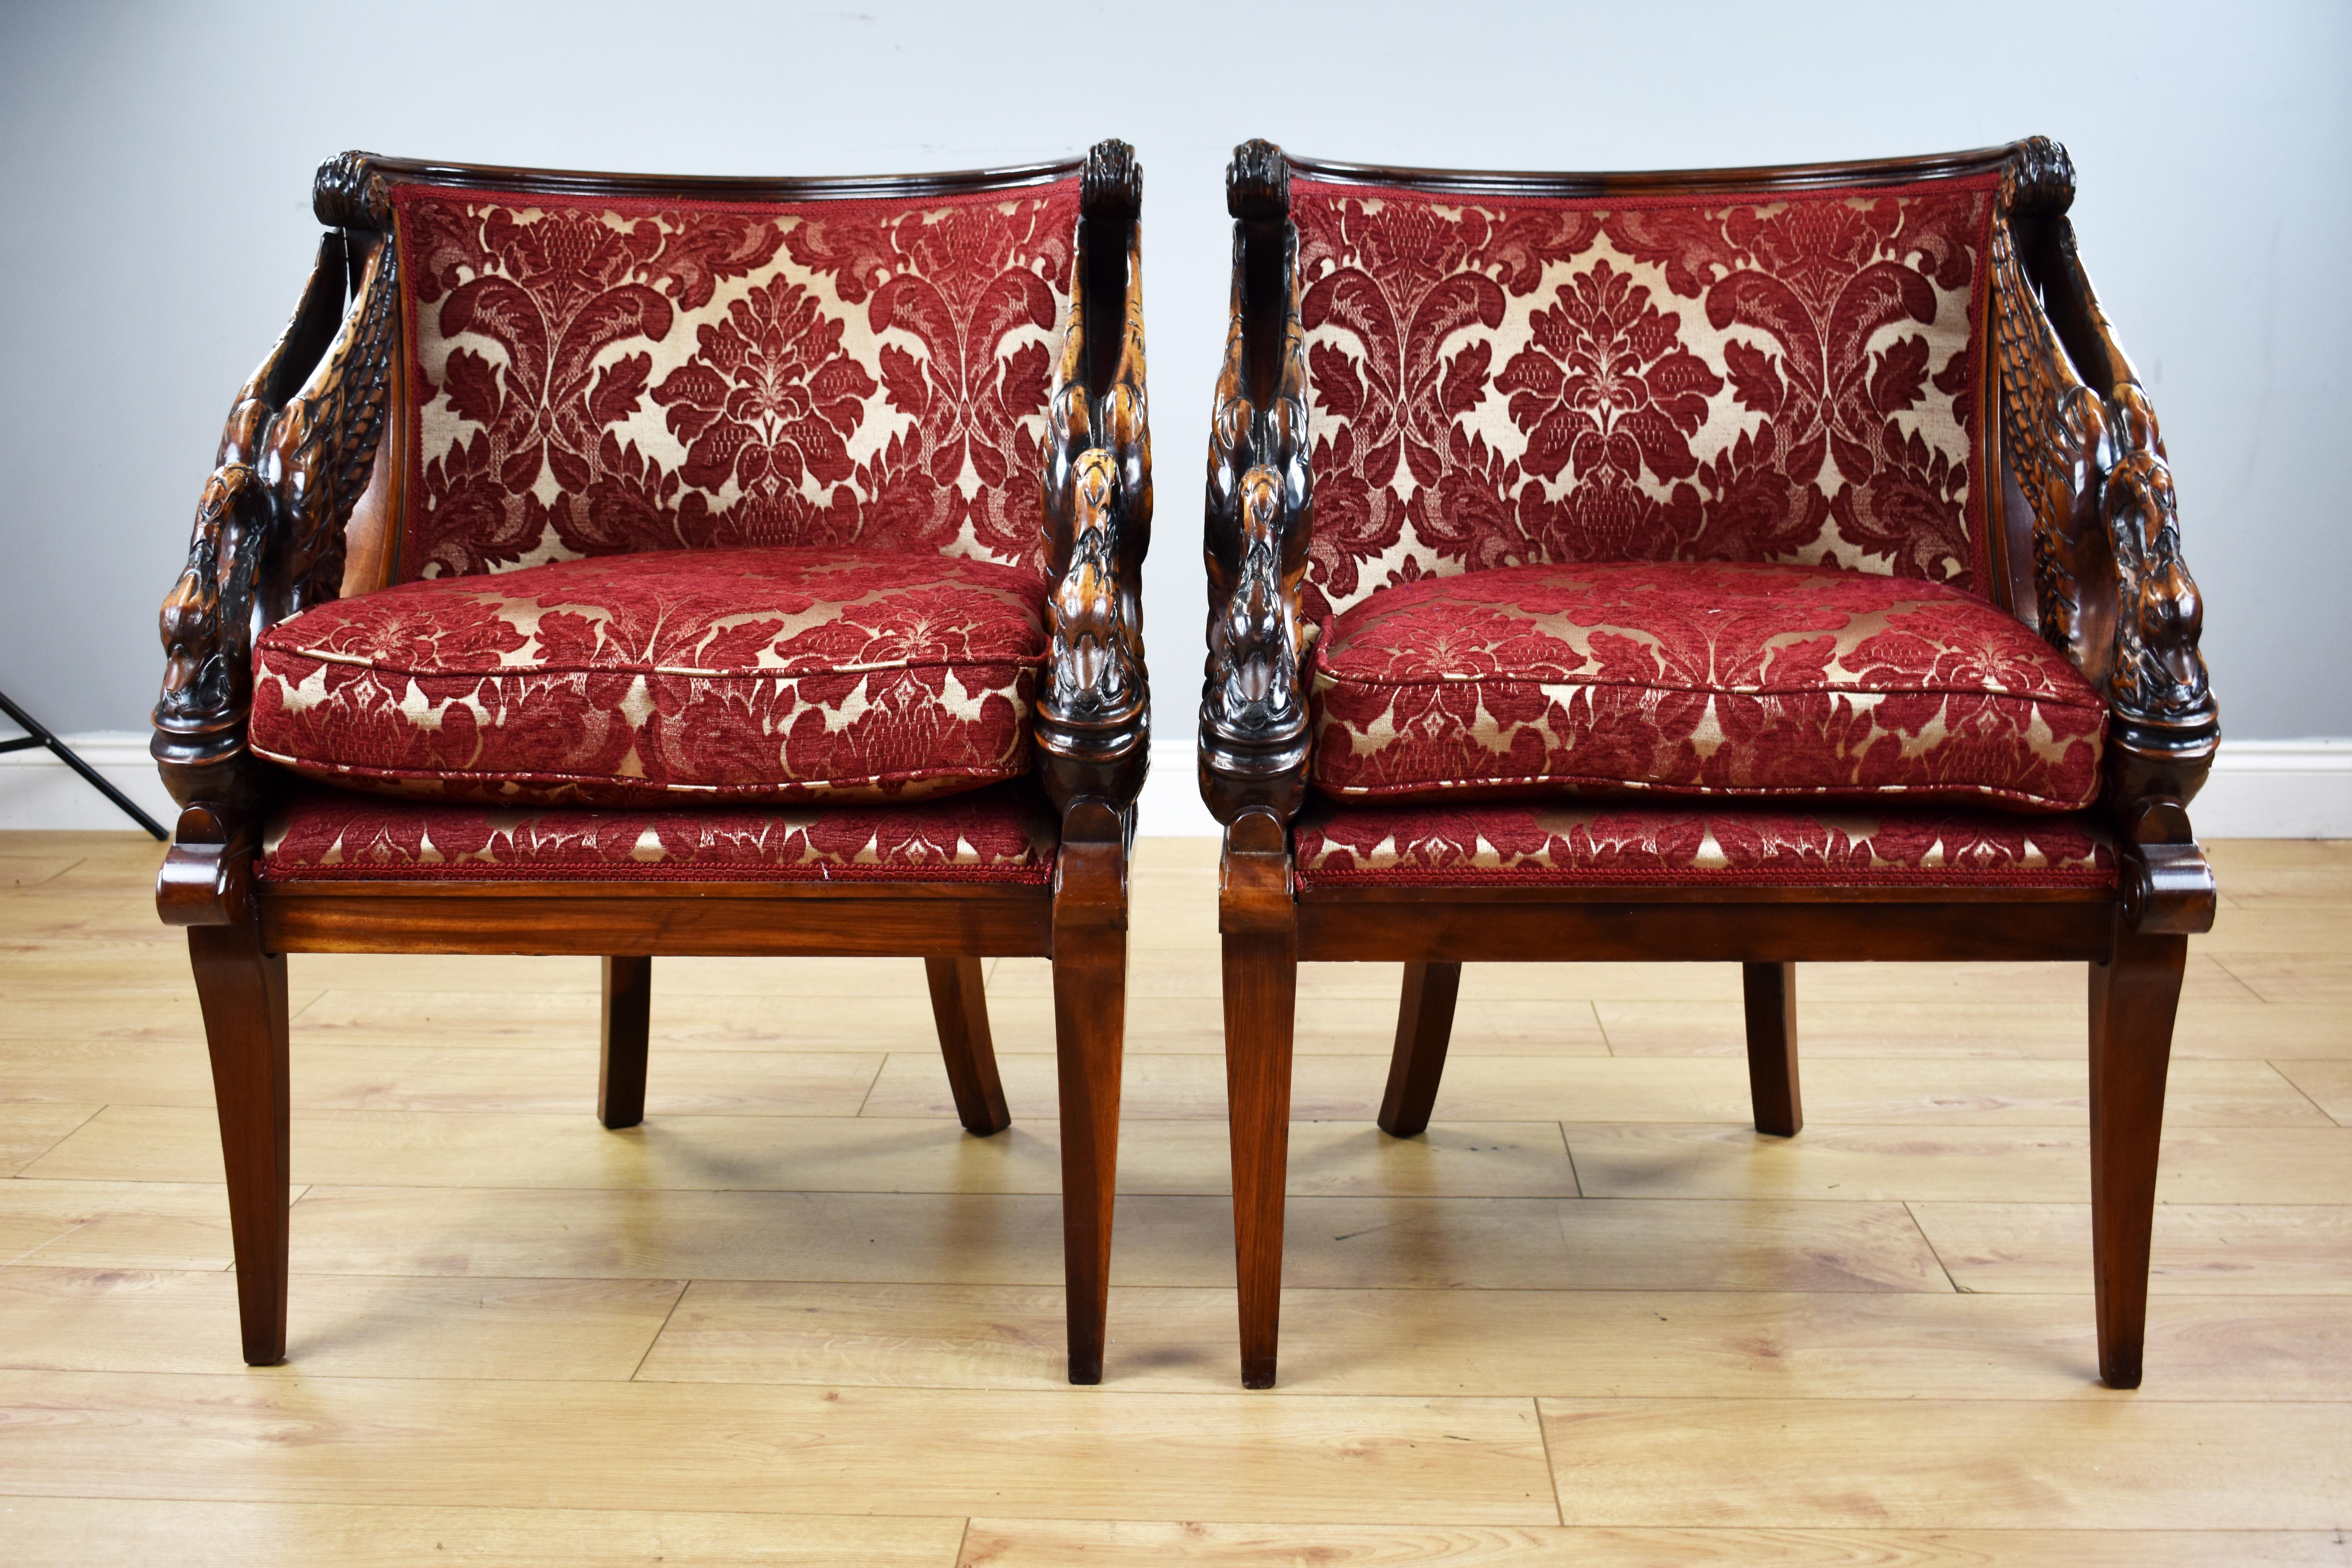 For sale is a pair of good quality French Empire style tub chairs, each with mahogany frames and ornately carved swan arms, standing on splayed legs. Each chair is upholstered in a red damask with a medallion pattern and both chairs are in very good